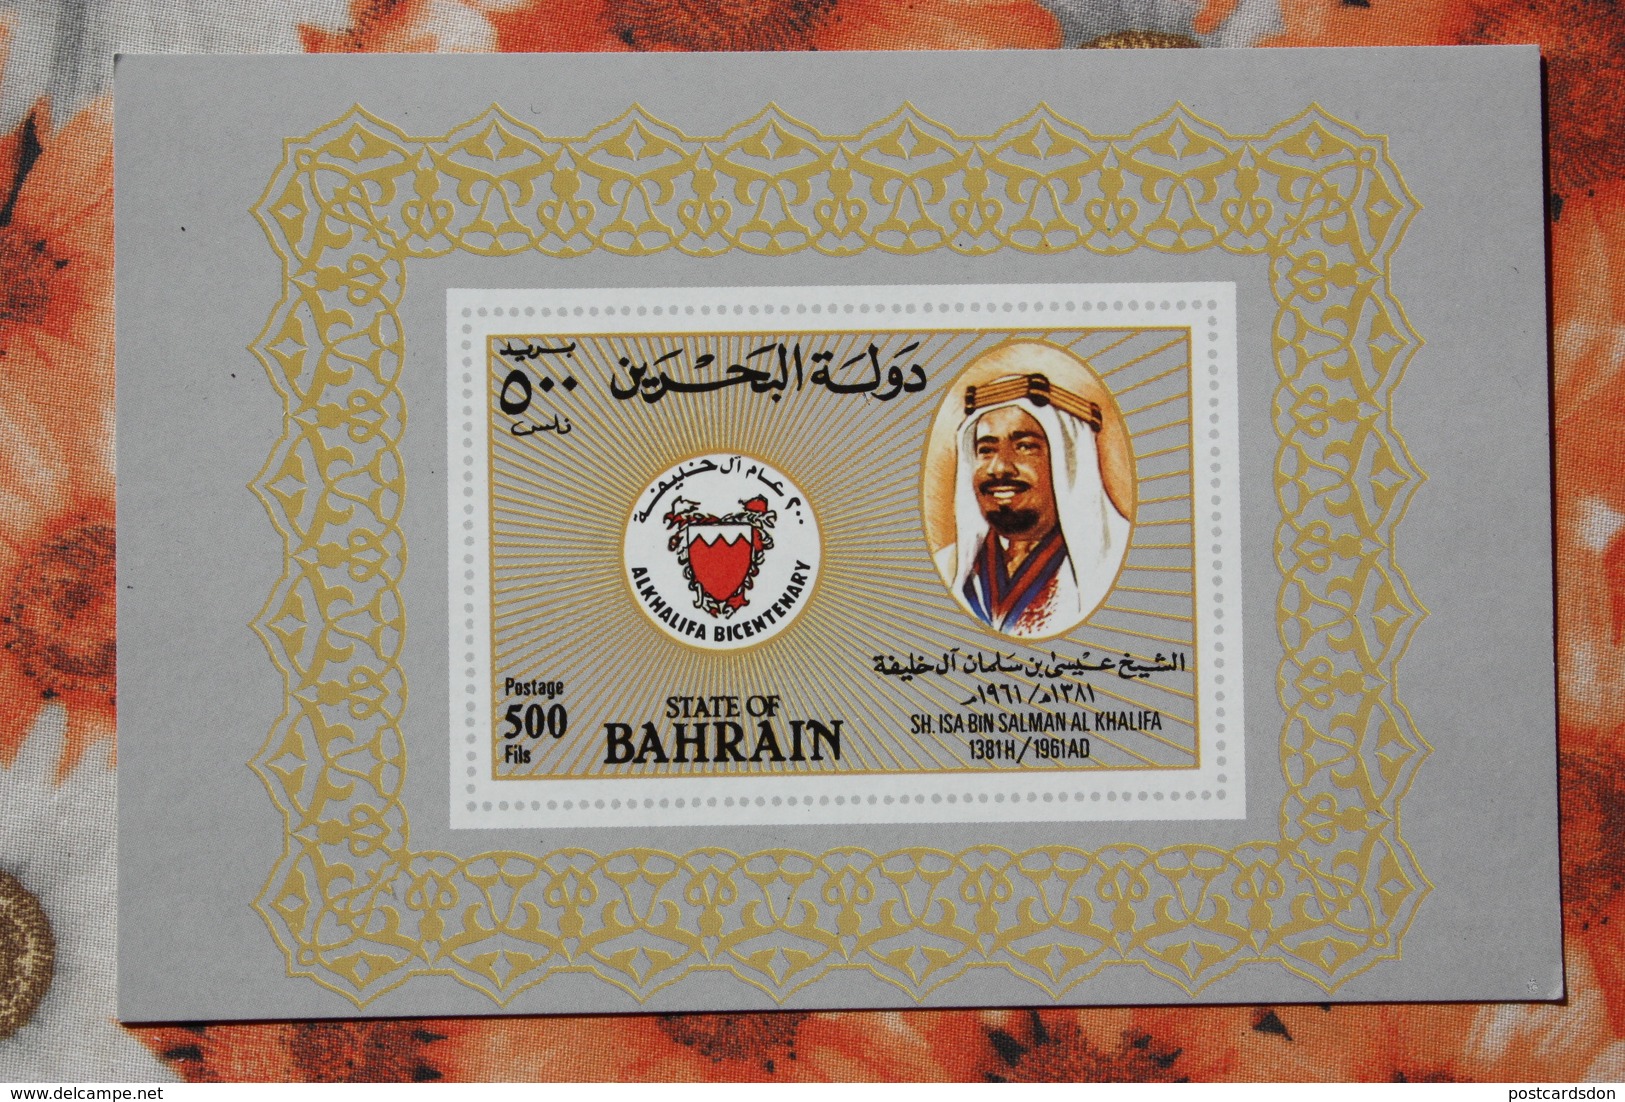 Bahrain Historical Stamp - Old Postcard 1970s - Stamps (pictures)